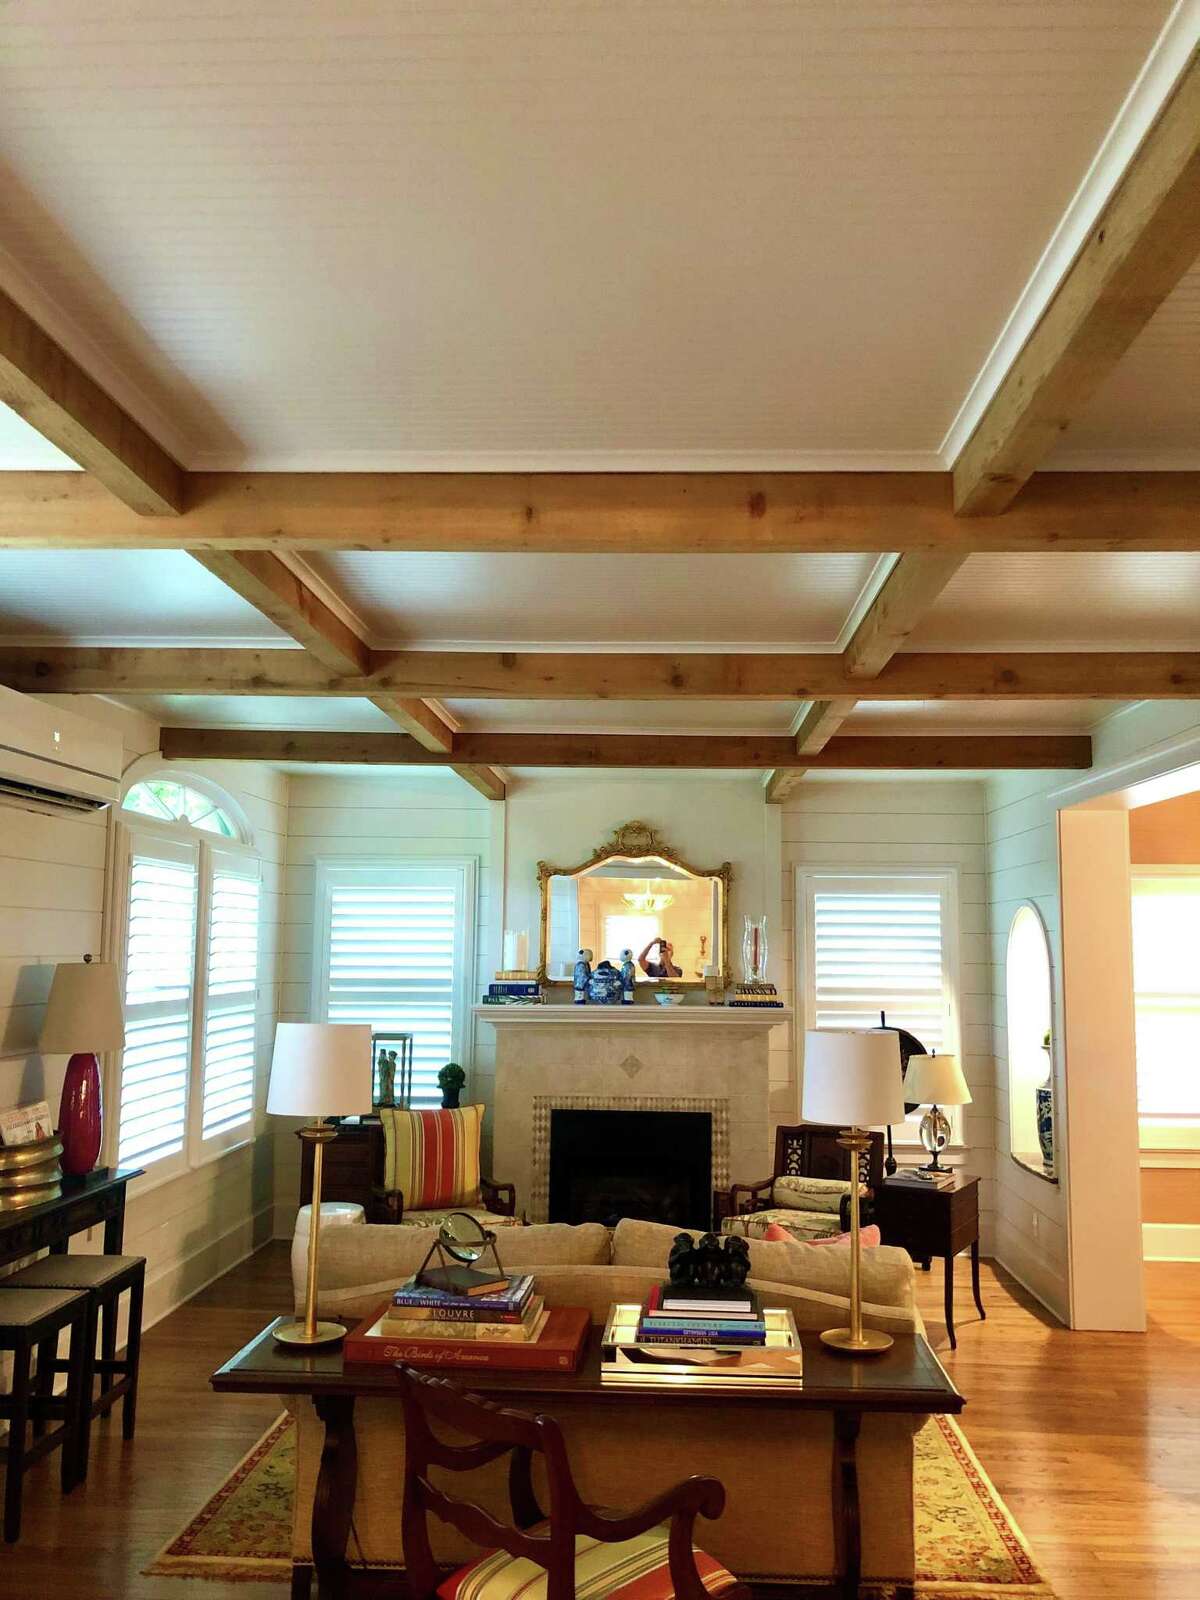 The eye-catching coffered ceilings in Helen and Mitch Seal’s Alta Vista home were created with decorative cedar beams and bead board paneling of the kind typically used as wainscoting.